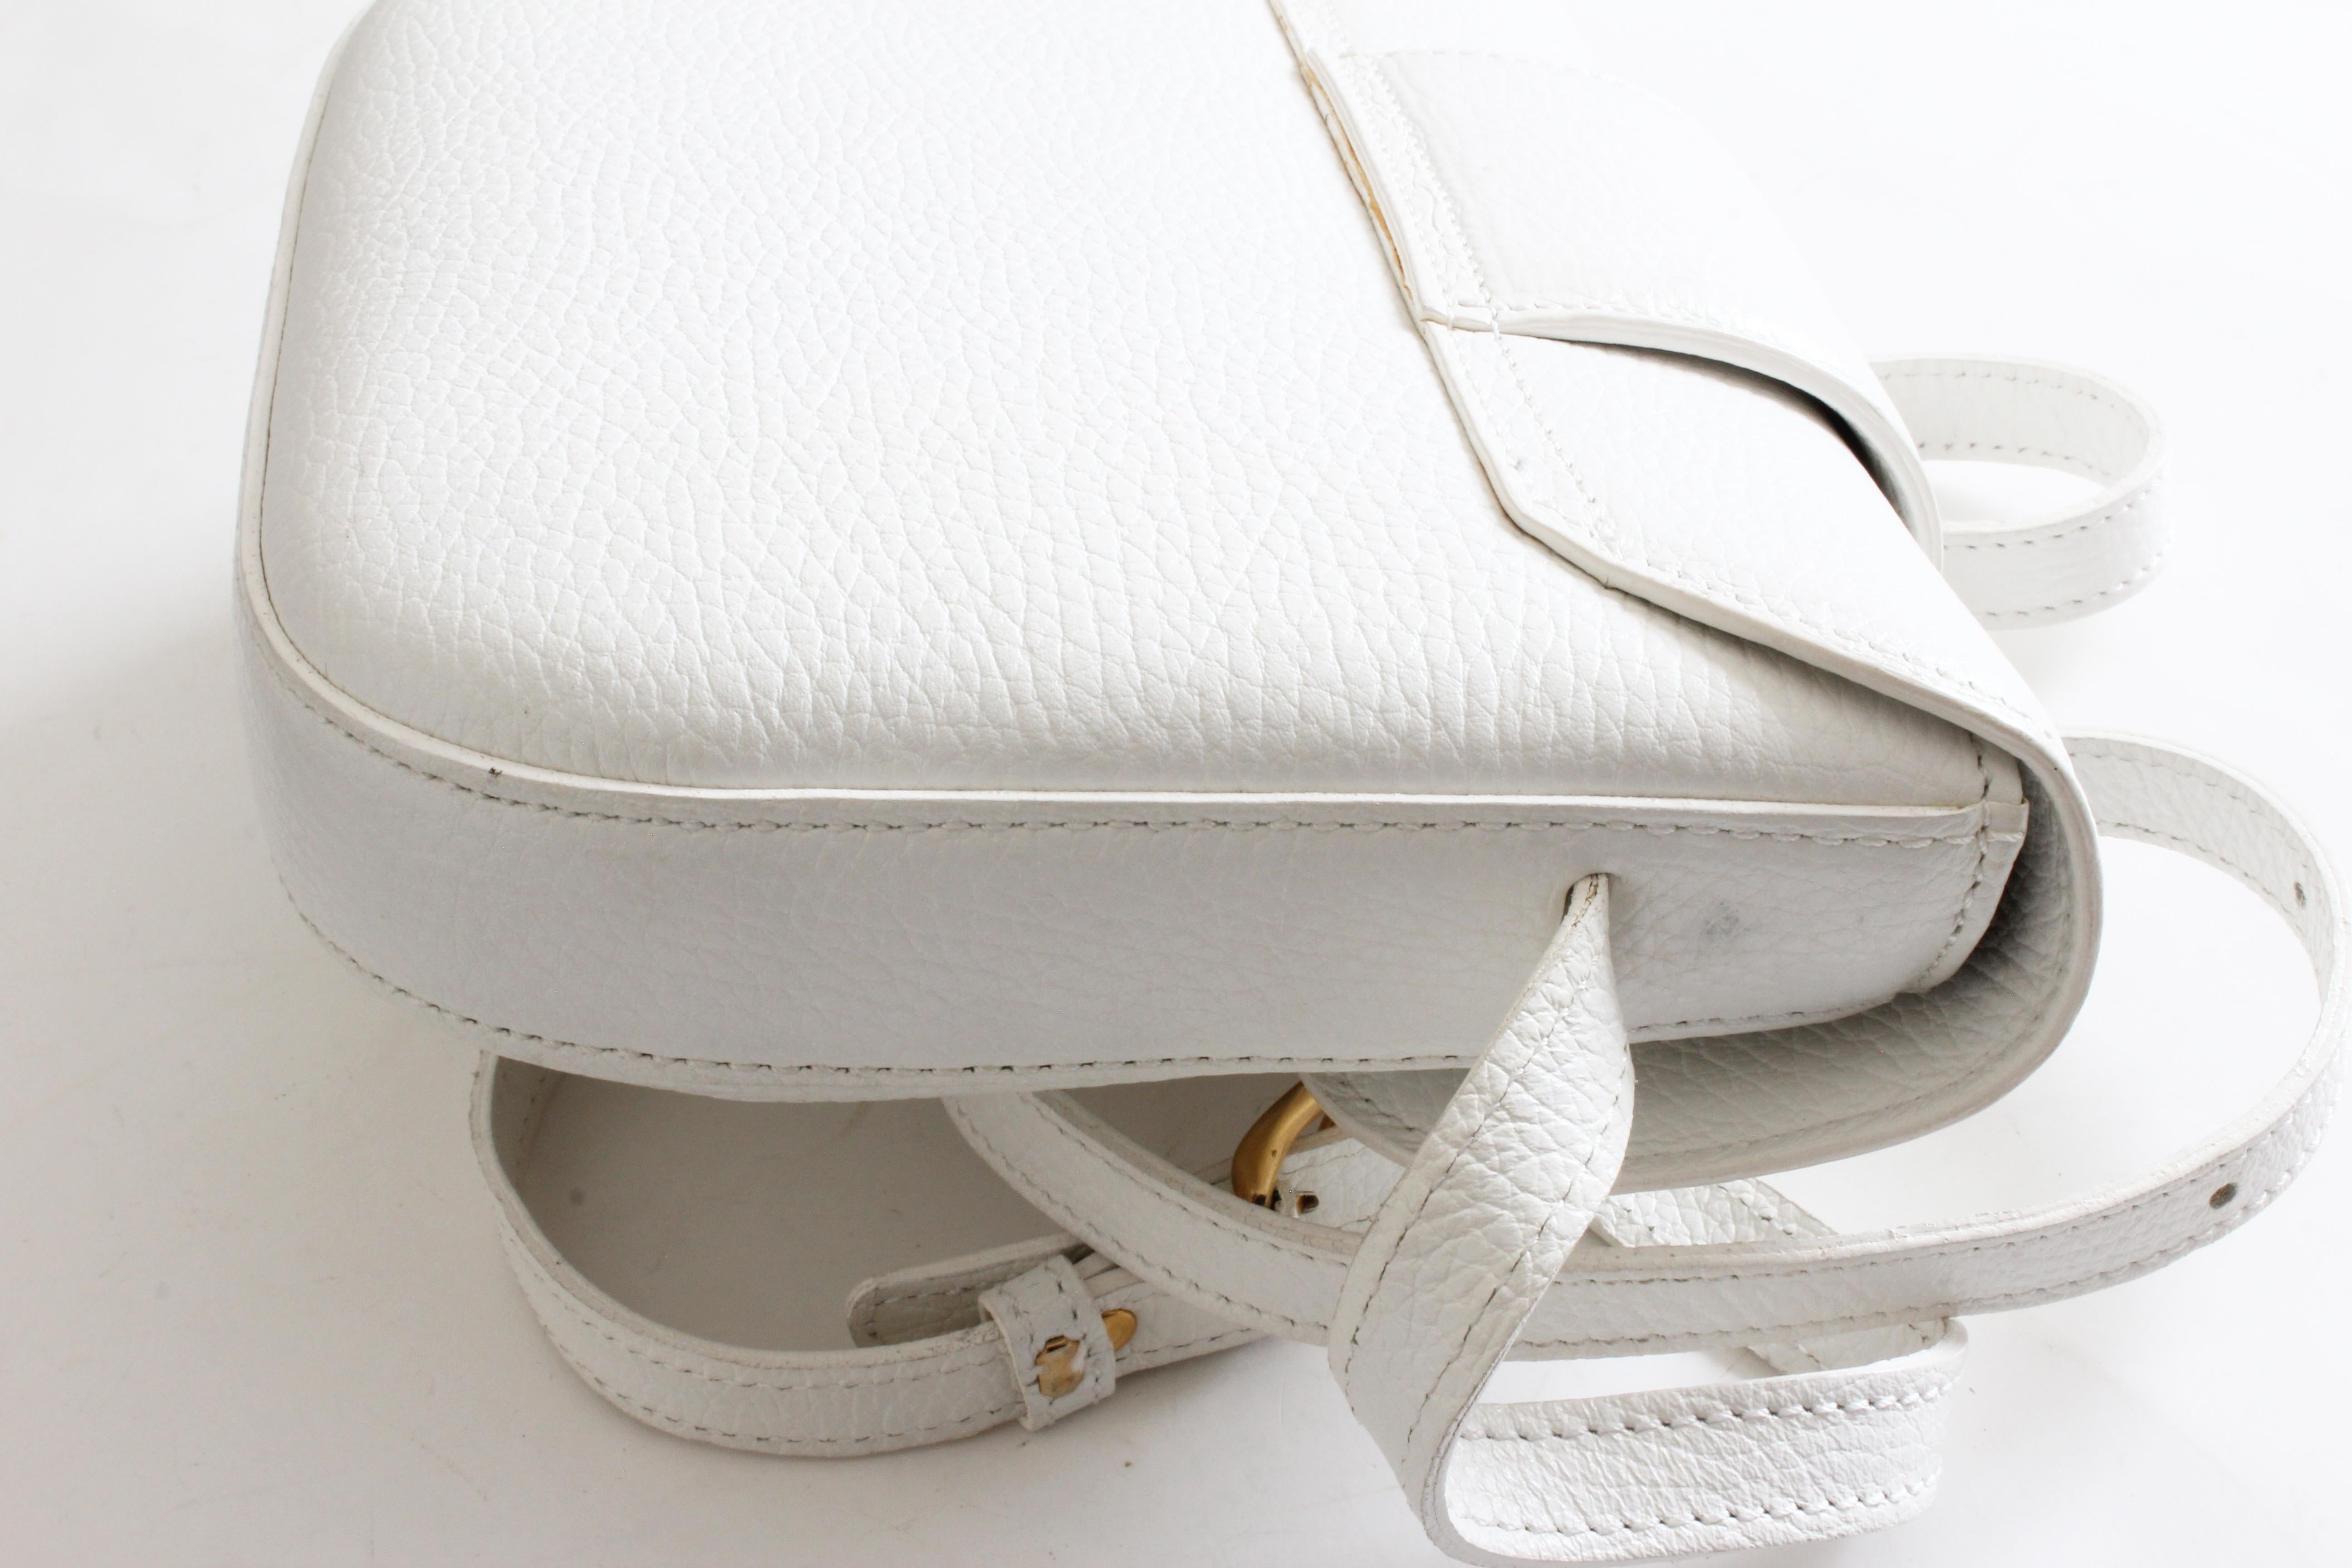 Bally Crossbody Bag White Pebbled Leather Top Flap Shoulder Bag Italy Vintage For Sale 5